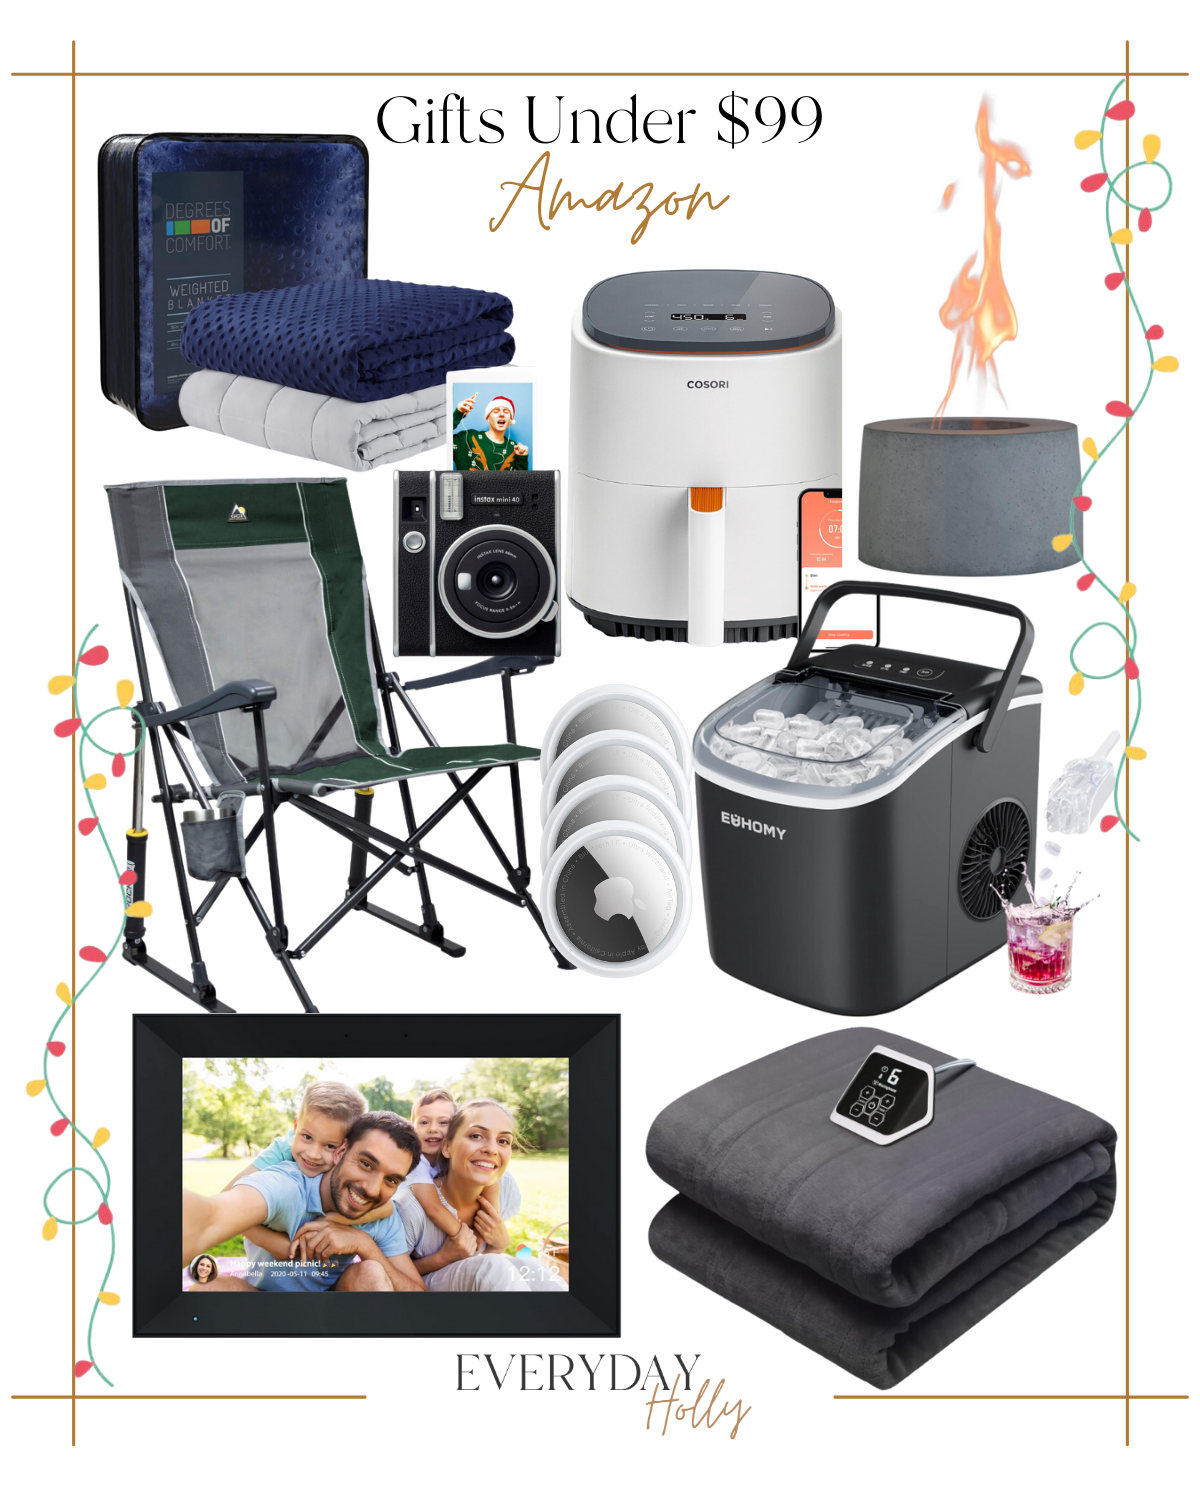 99 last minute gifts under $99 | #last #minute #gifts #giftideas #giftsunder99 #under99 #home #blanket #airfryer #firepit #chair #icemaker #photoframe #heatedblanket #giftsforparents #giftsfordad #giftsformom